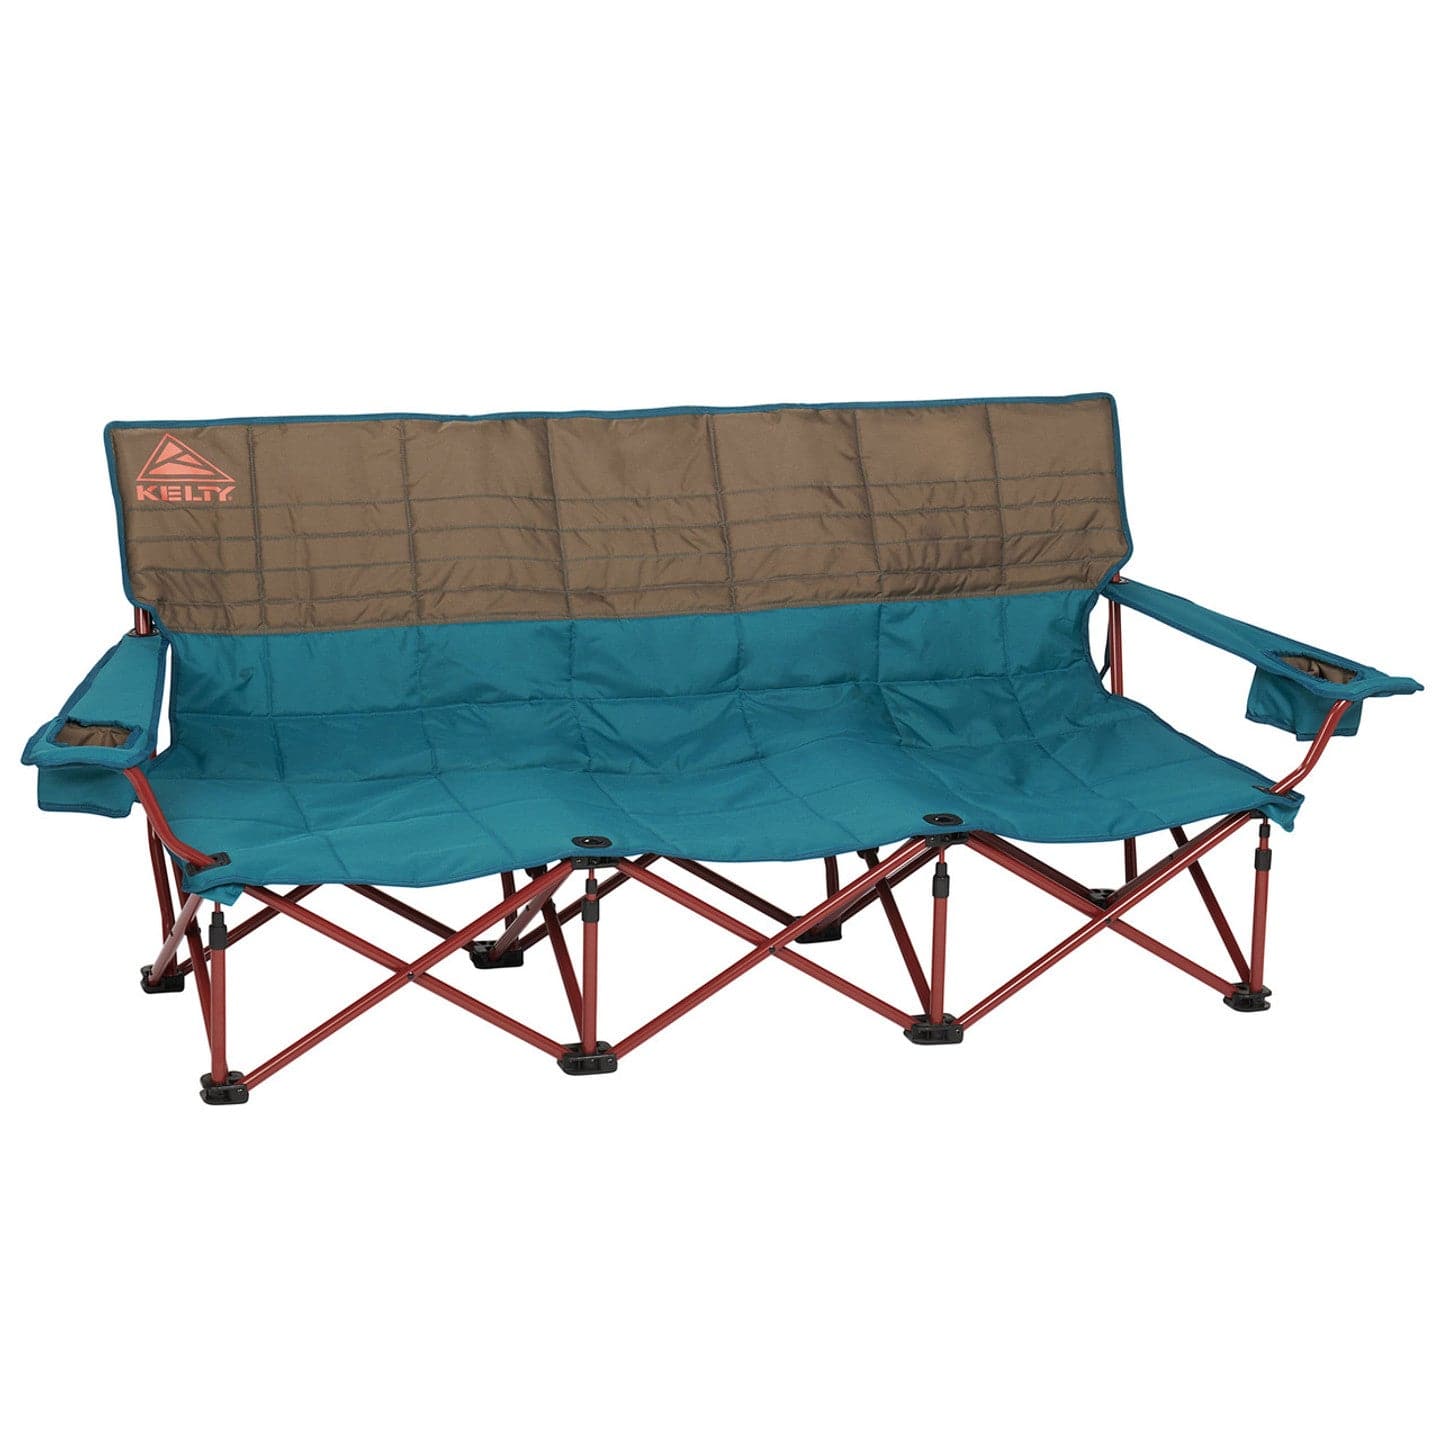 Featuring the Lowdown Couch camp chair, camp couch, kelty manufactured by Kelty shown here from one angle.